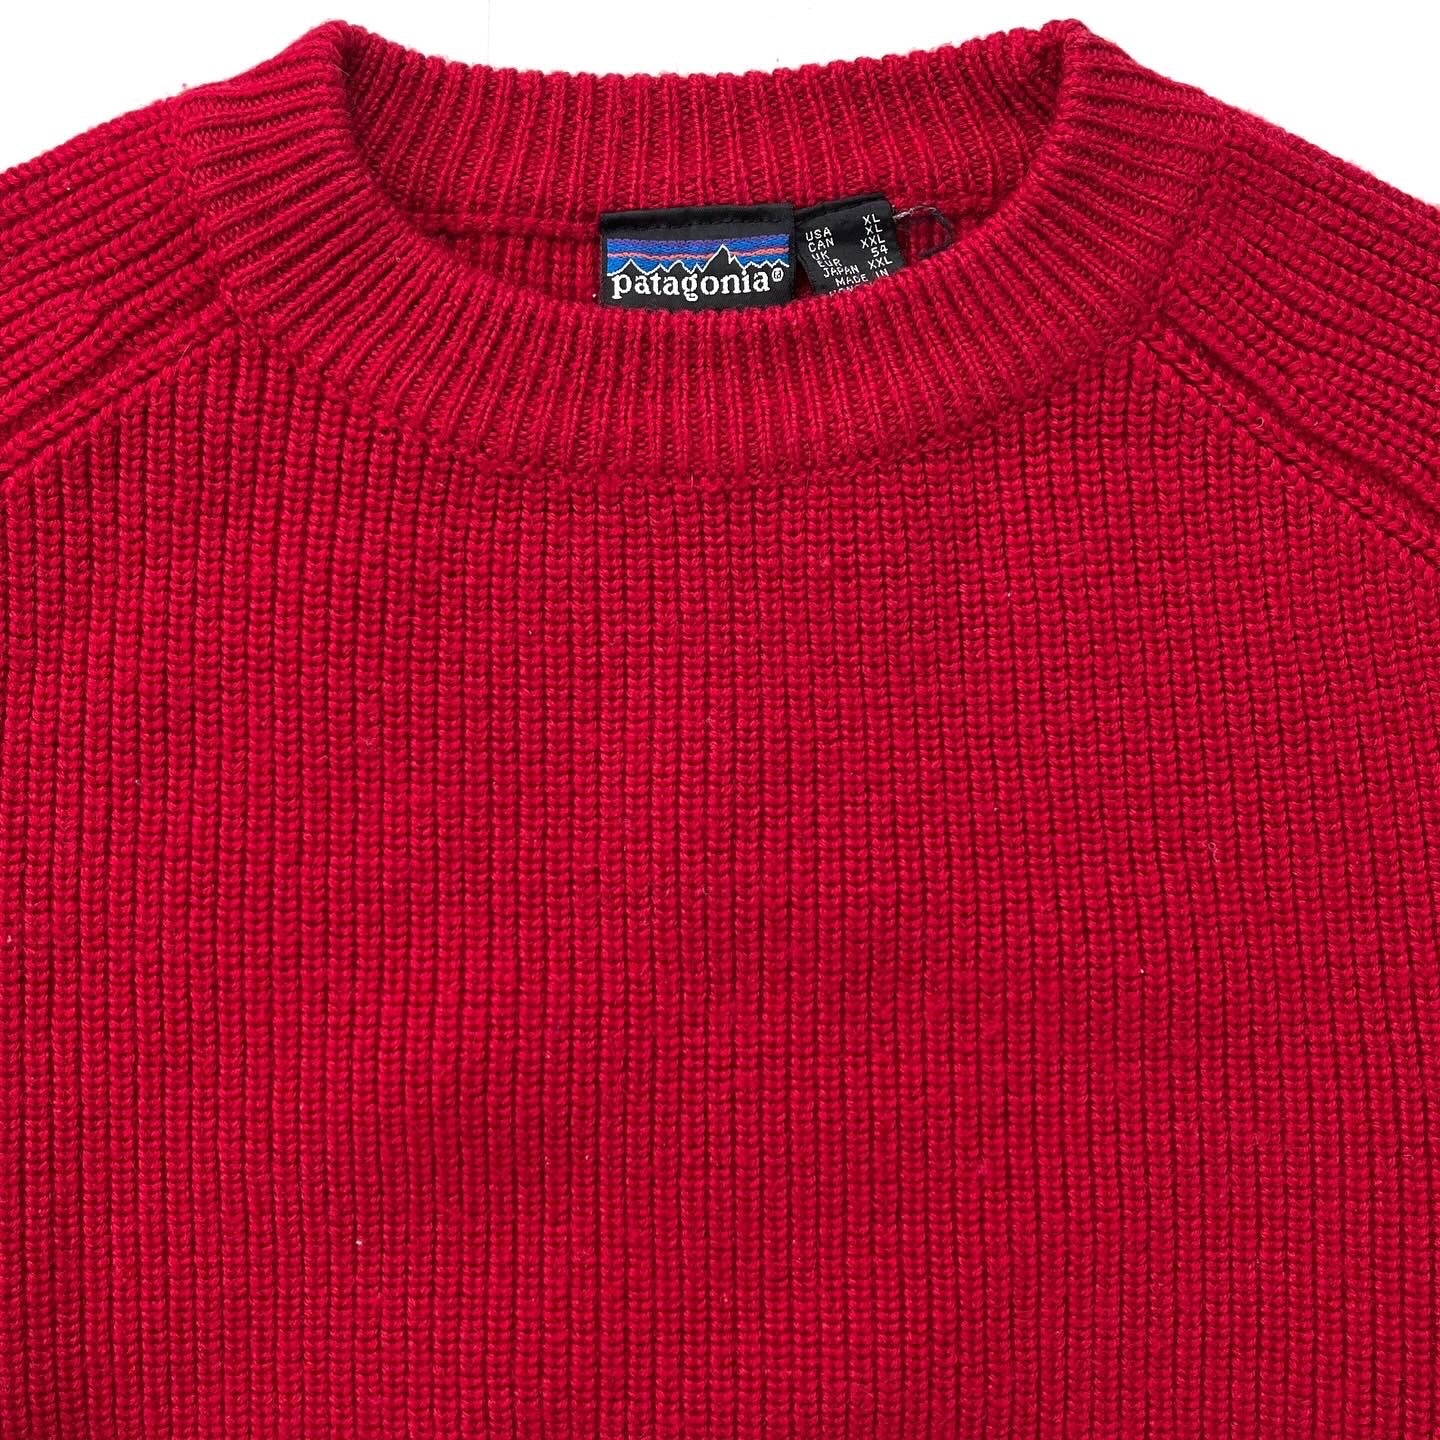 1982 Patagonia Chamonix Heavy Wool Guide Sweater, Red (L)